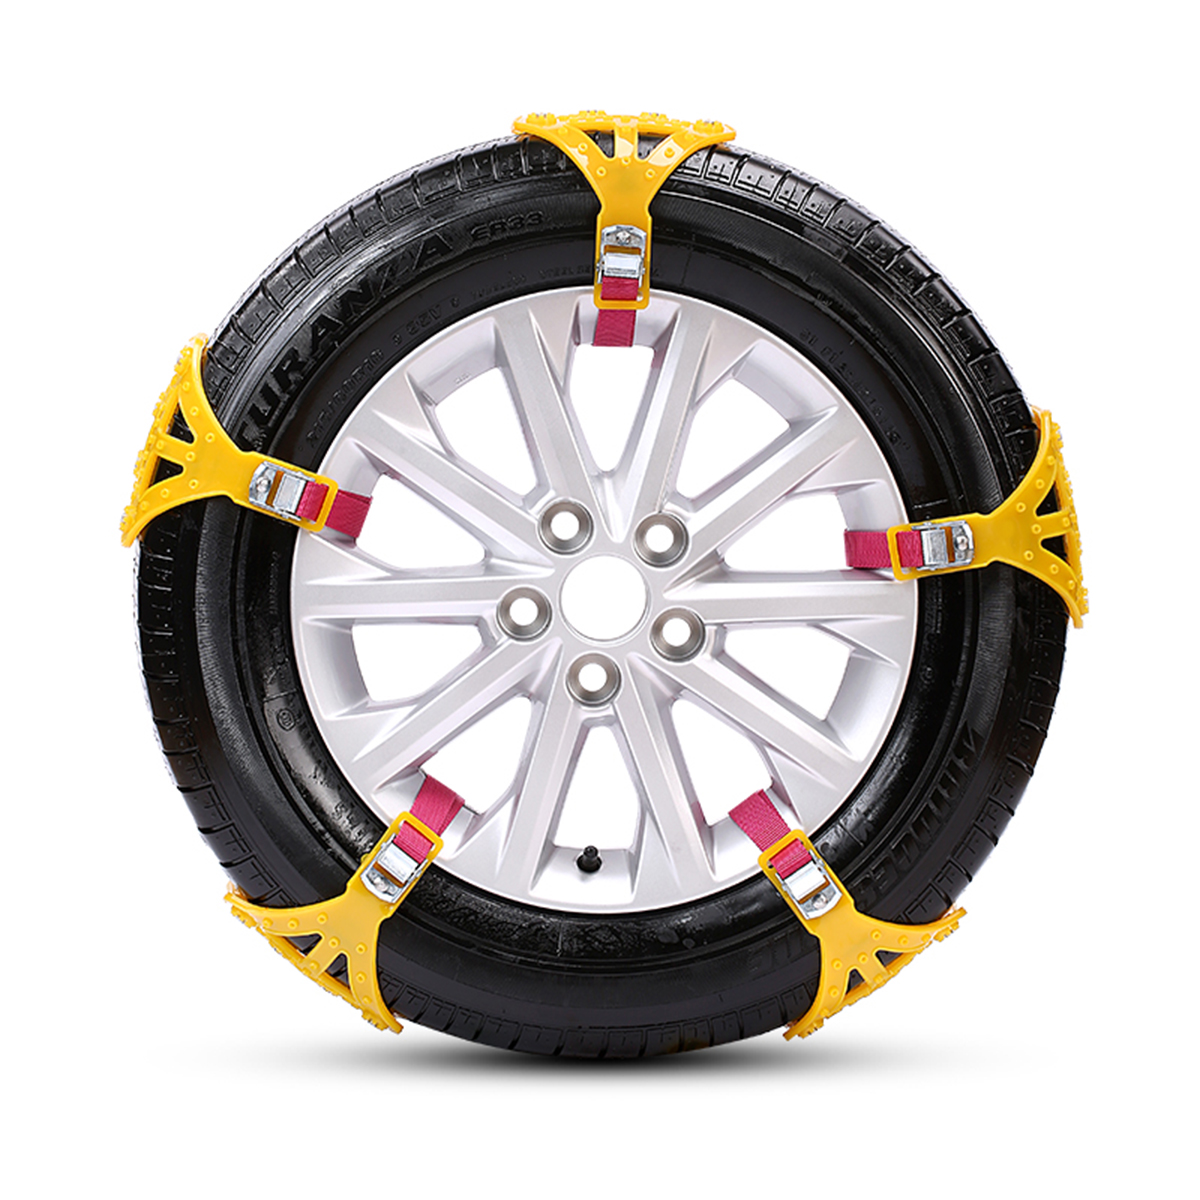 

Car Snow Chain Tire Anti-skid Chains Thickened Beef Tendon Wheel Chain for Snow Mud Road